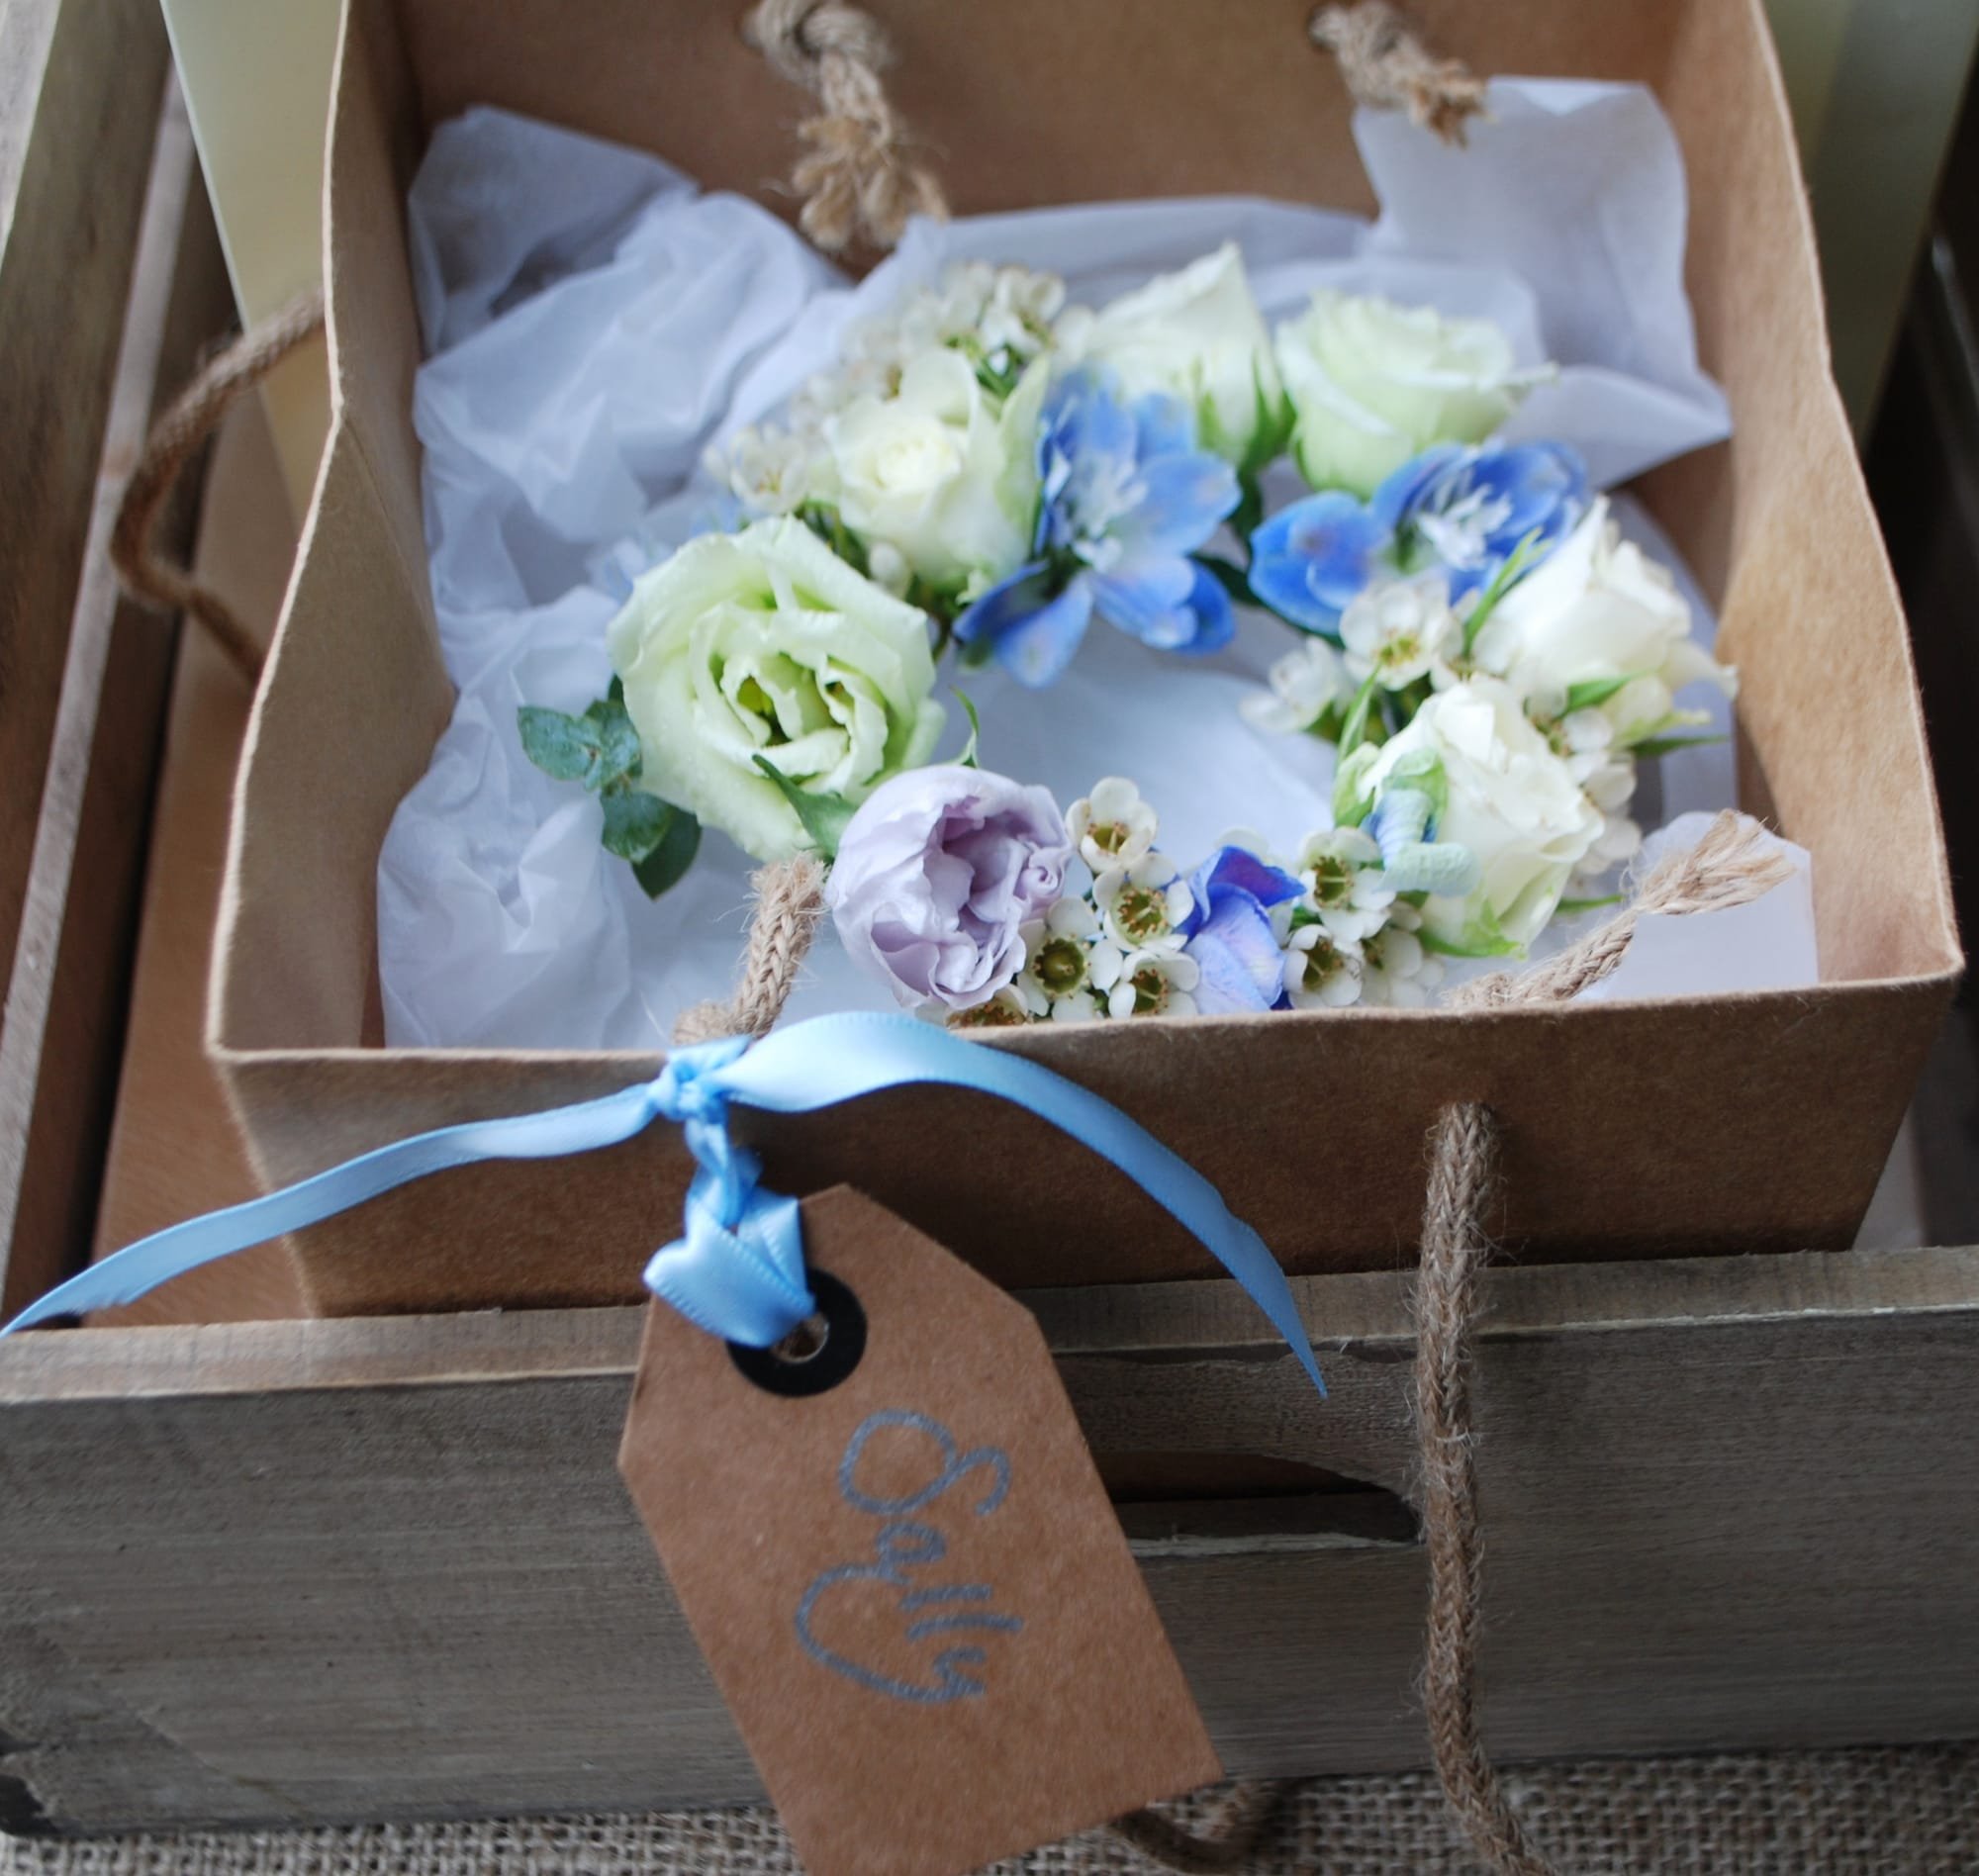 Corsage packed and ready for delivery.